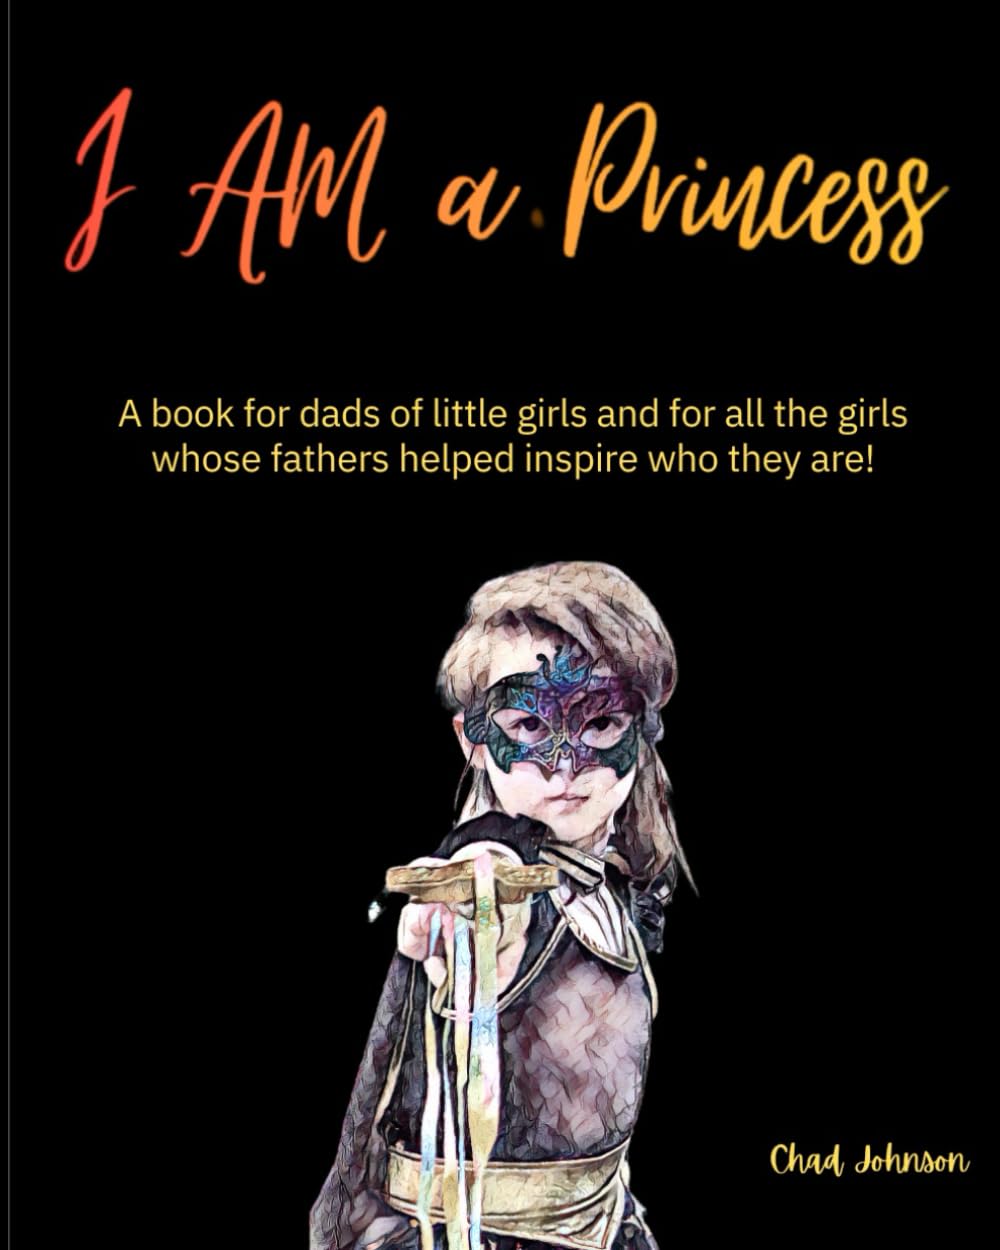 I AM a Princess: A book for dads of little girls and for all the girls whose fathers helped inspire who they are!